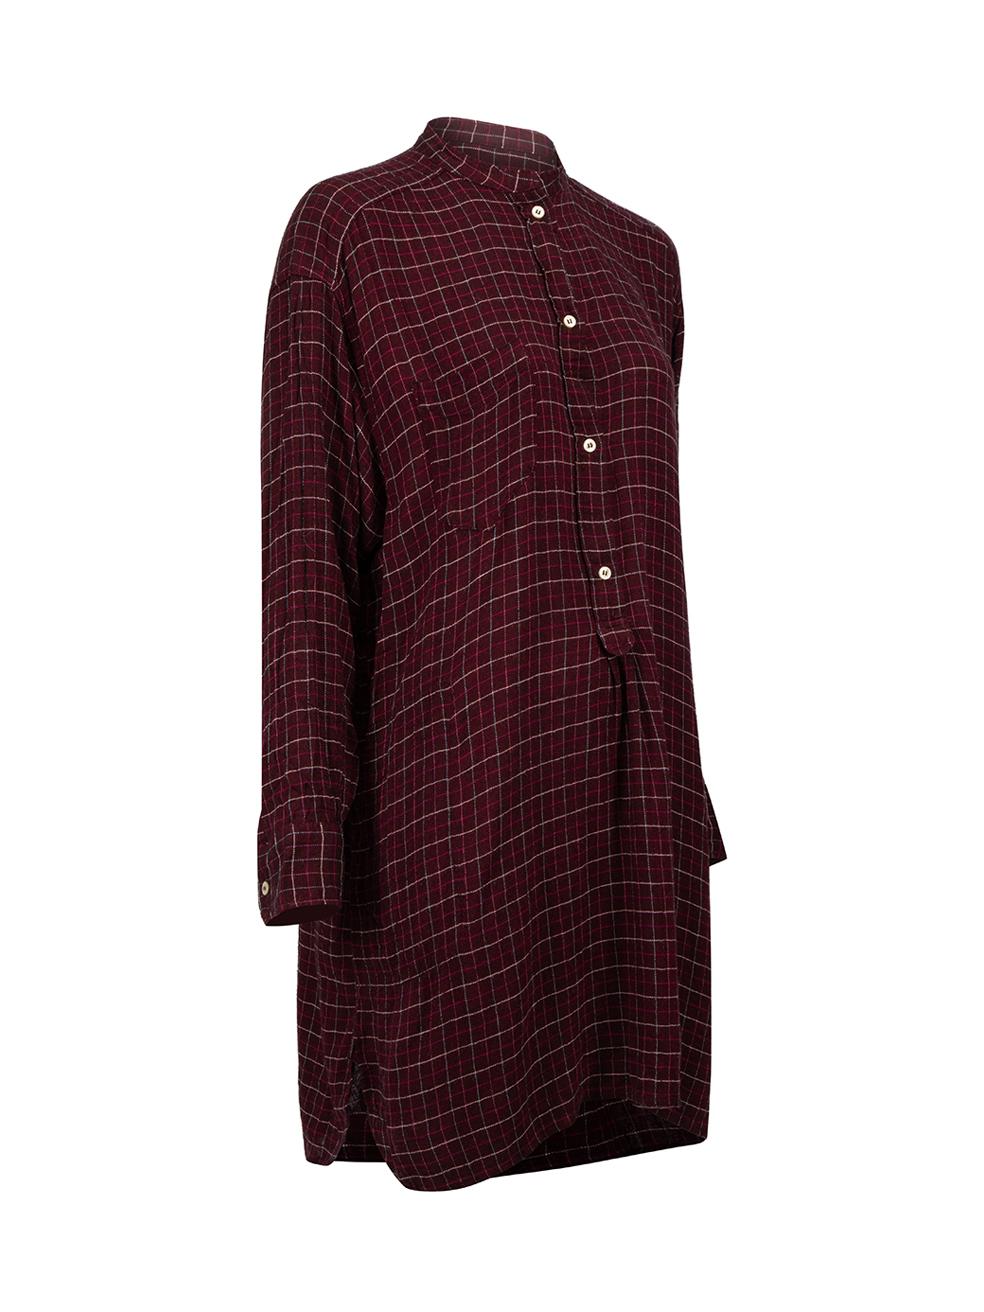 CONDITION is Very good. Hardly any visible wear to dress is evident on this used Isabel Marant Étoile designer resale item. 



Details


Burgundy

Viscose

Mini shirt dress

Checkered pattern

V neckline

Front 1/3 button up closure

Buttoned